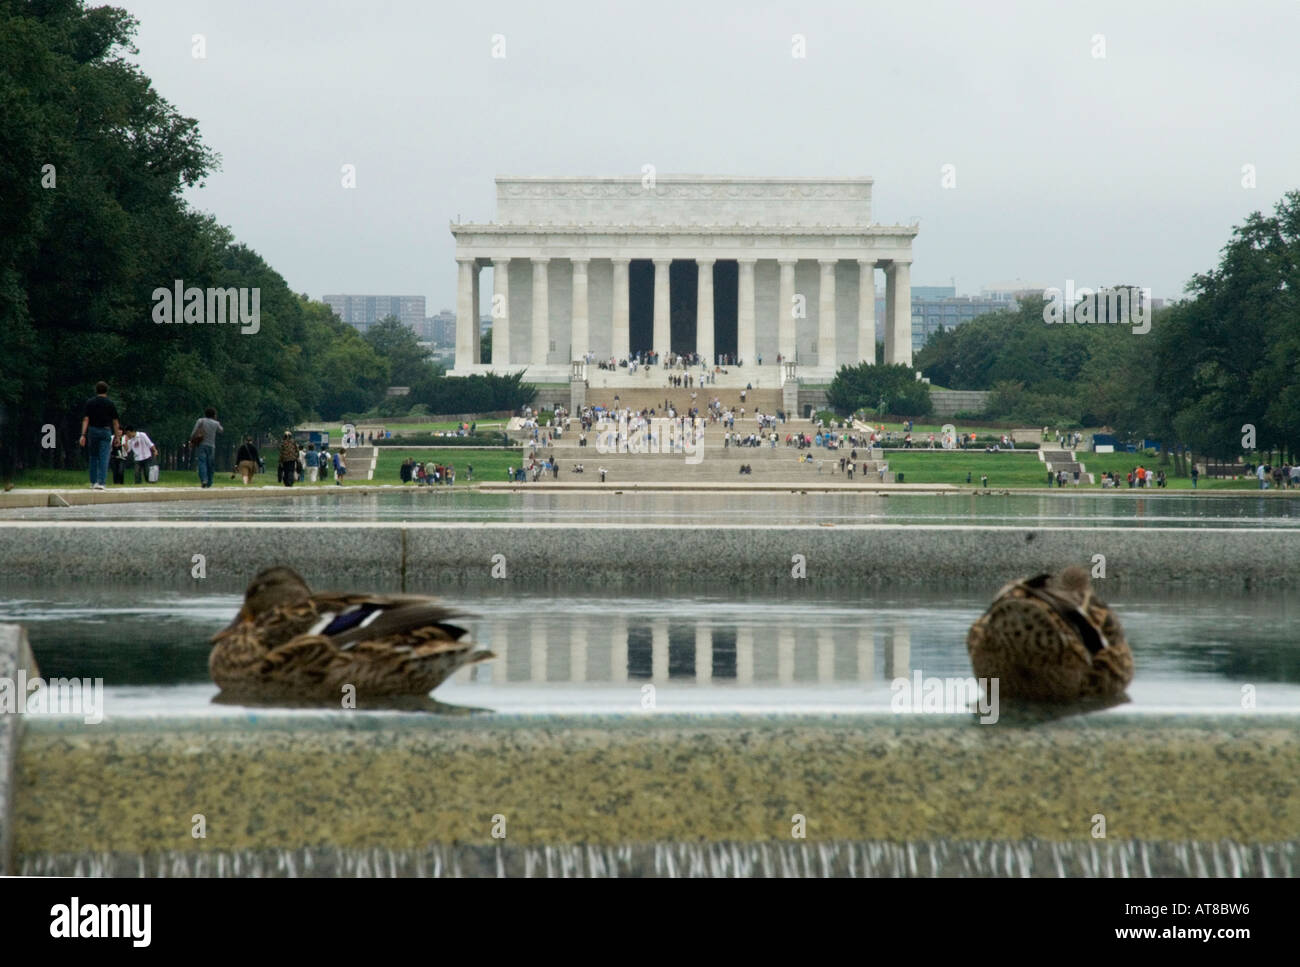 The Lincoln Memoial as viewed through two ducks from the World War II memorial in Washington DC United States of America Stock Photo